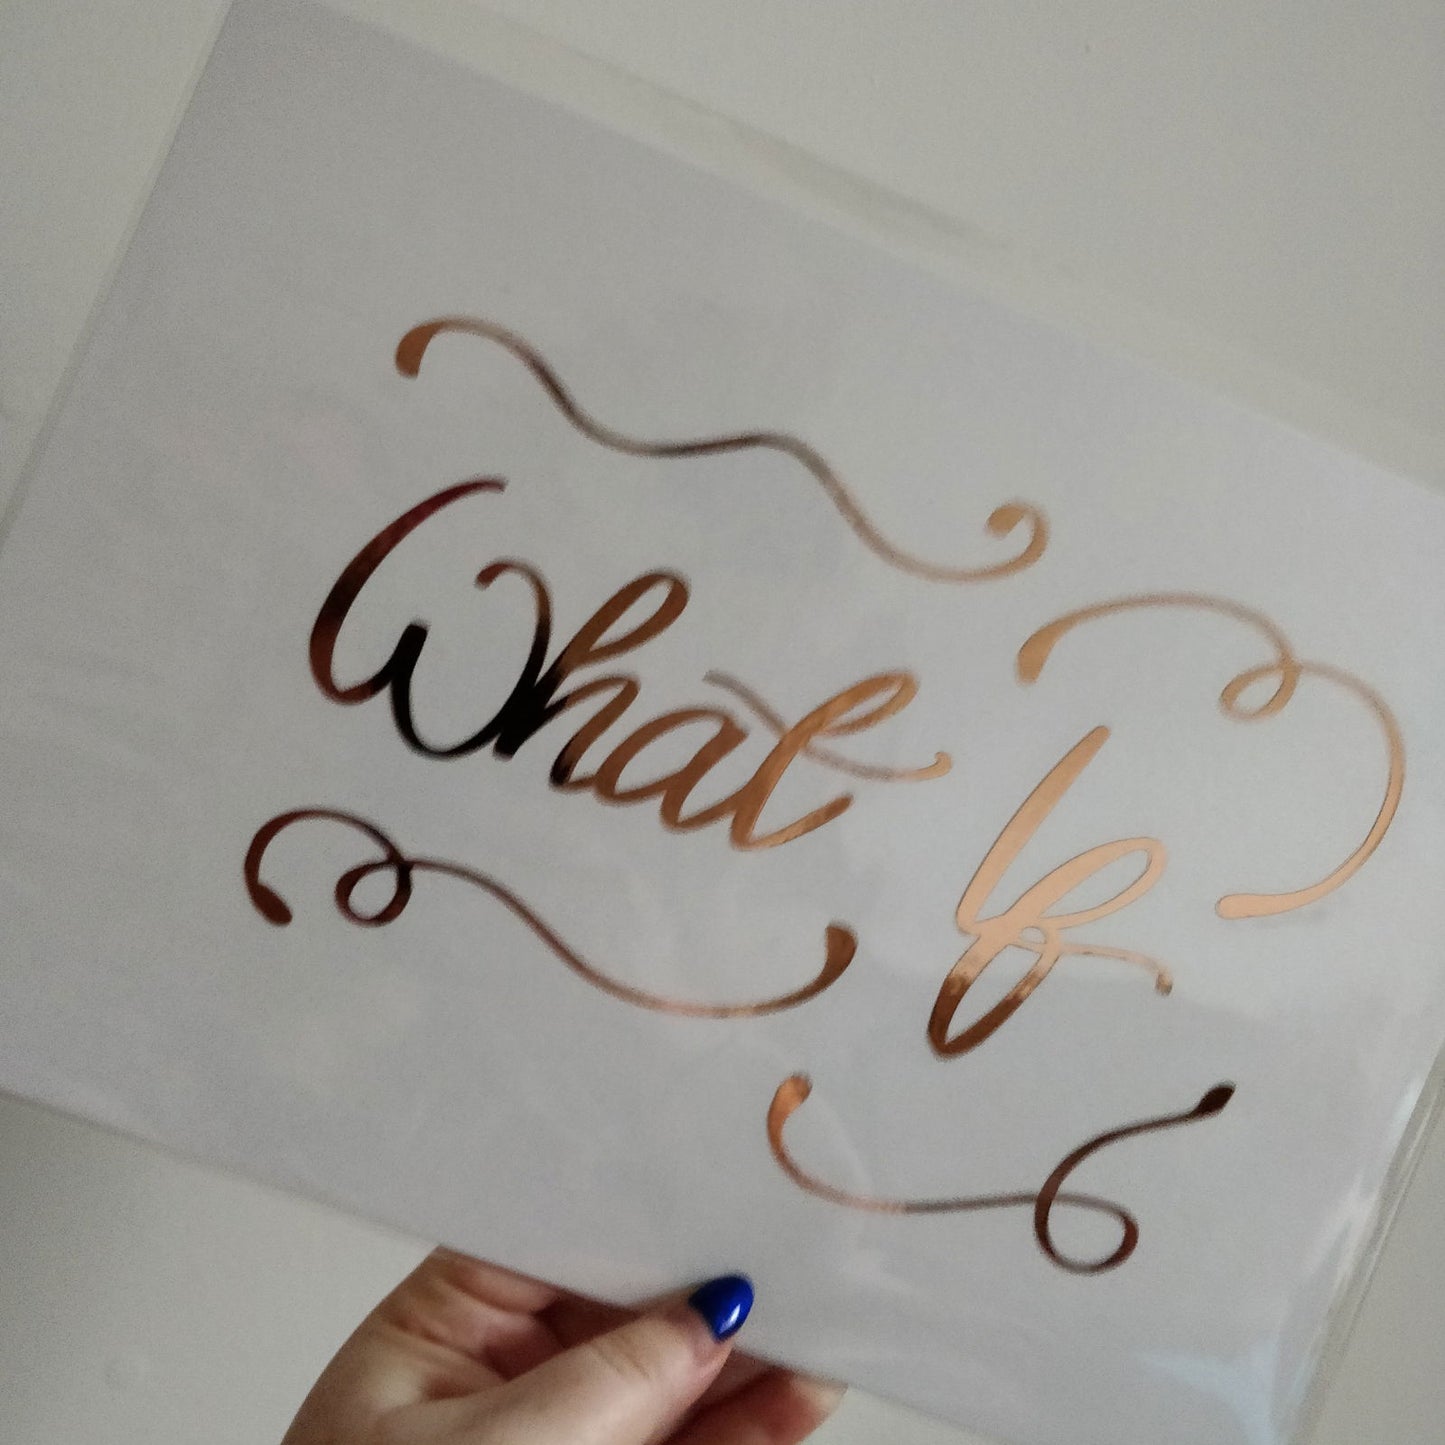 What If - A4 Print size with colour options - Fay Dixon Design